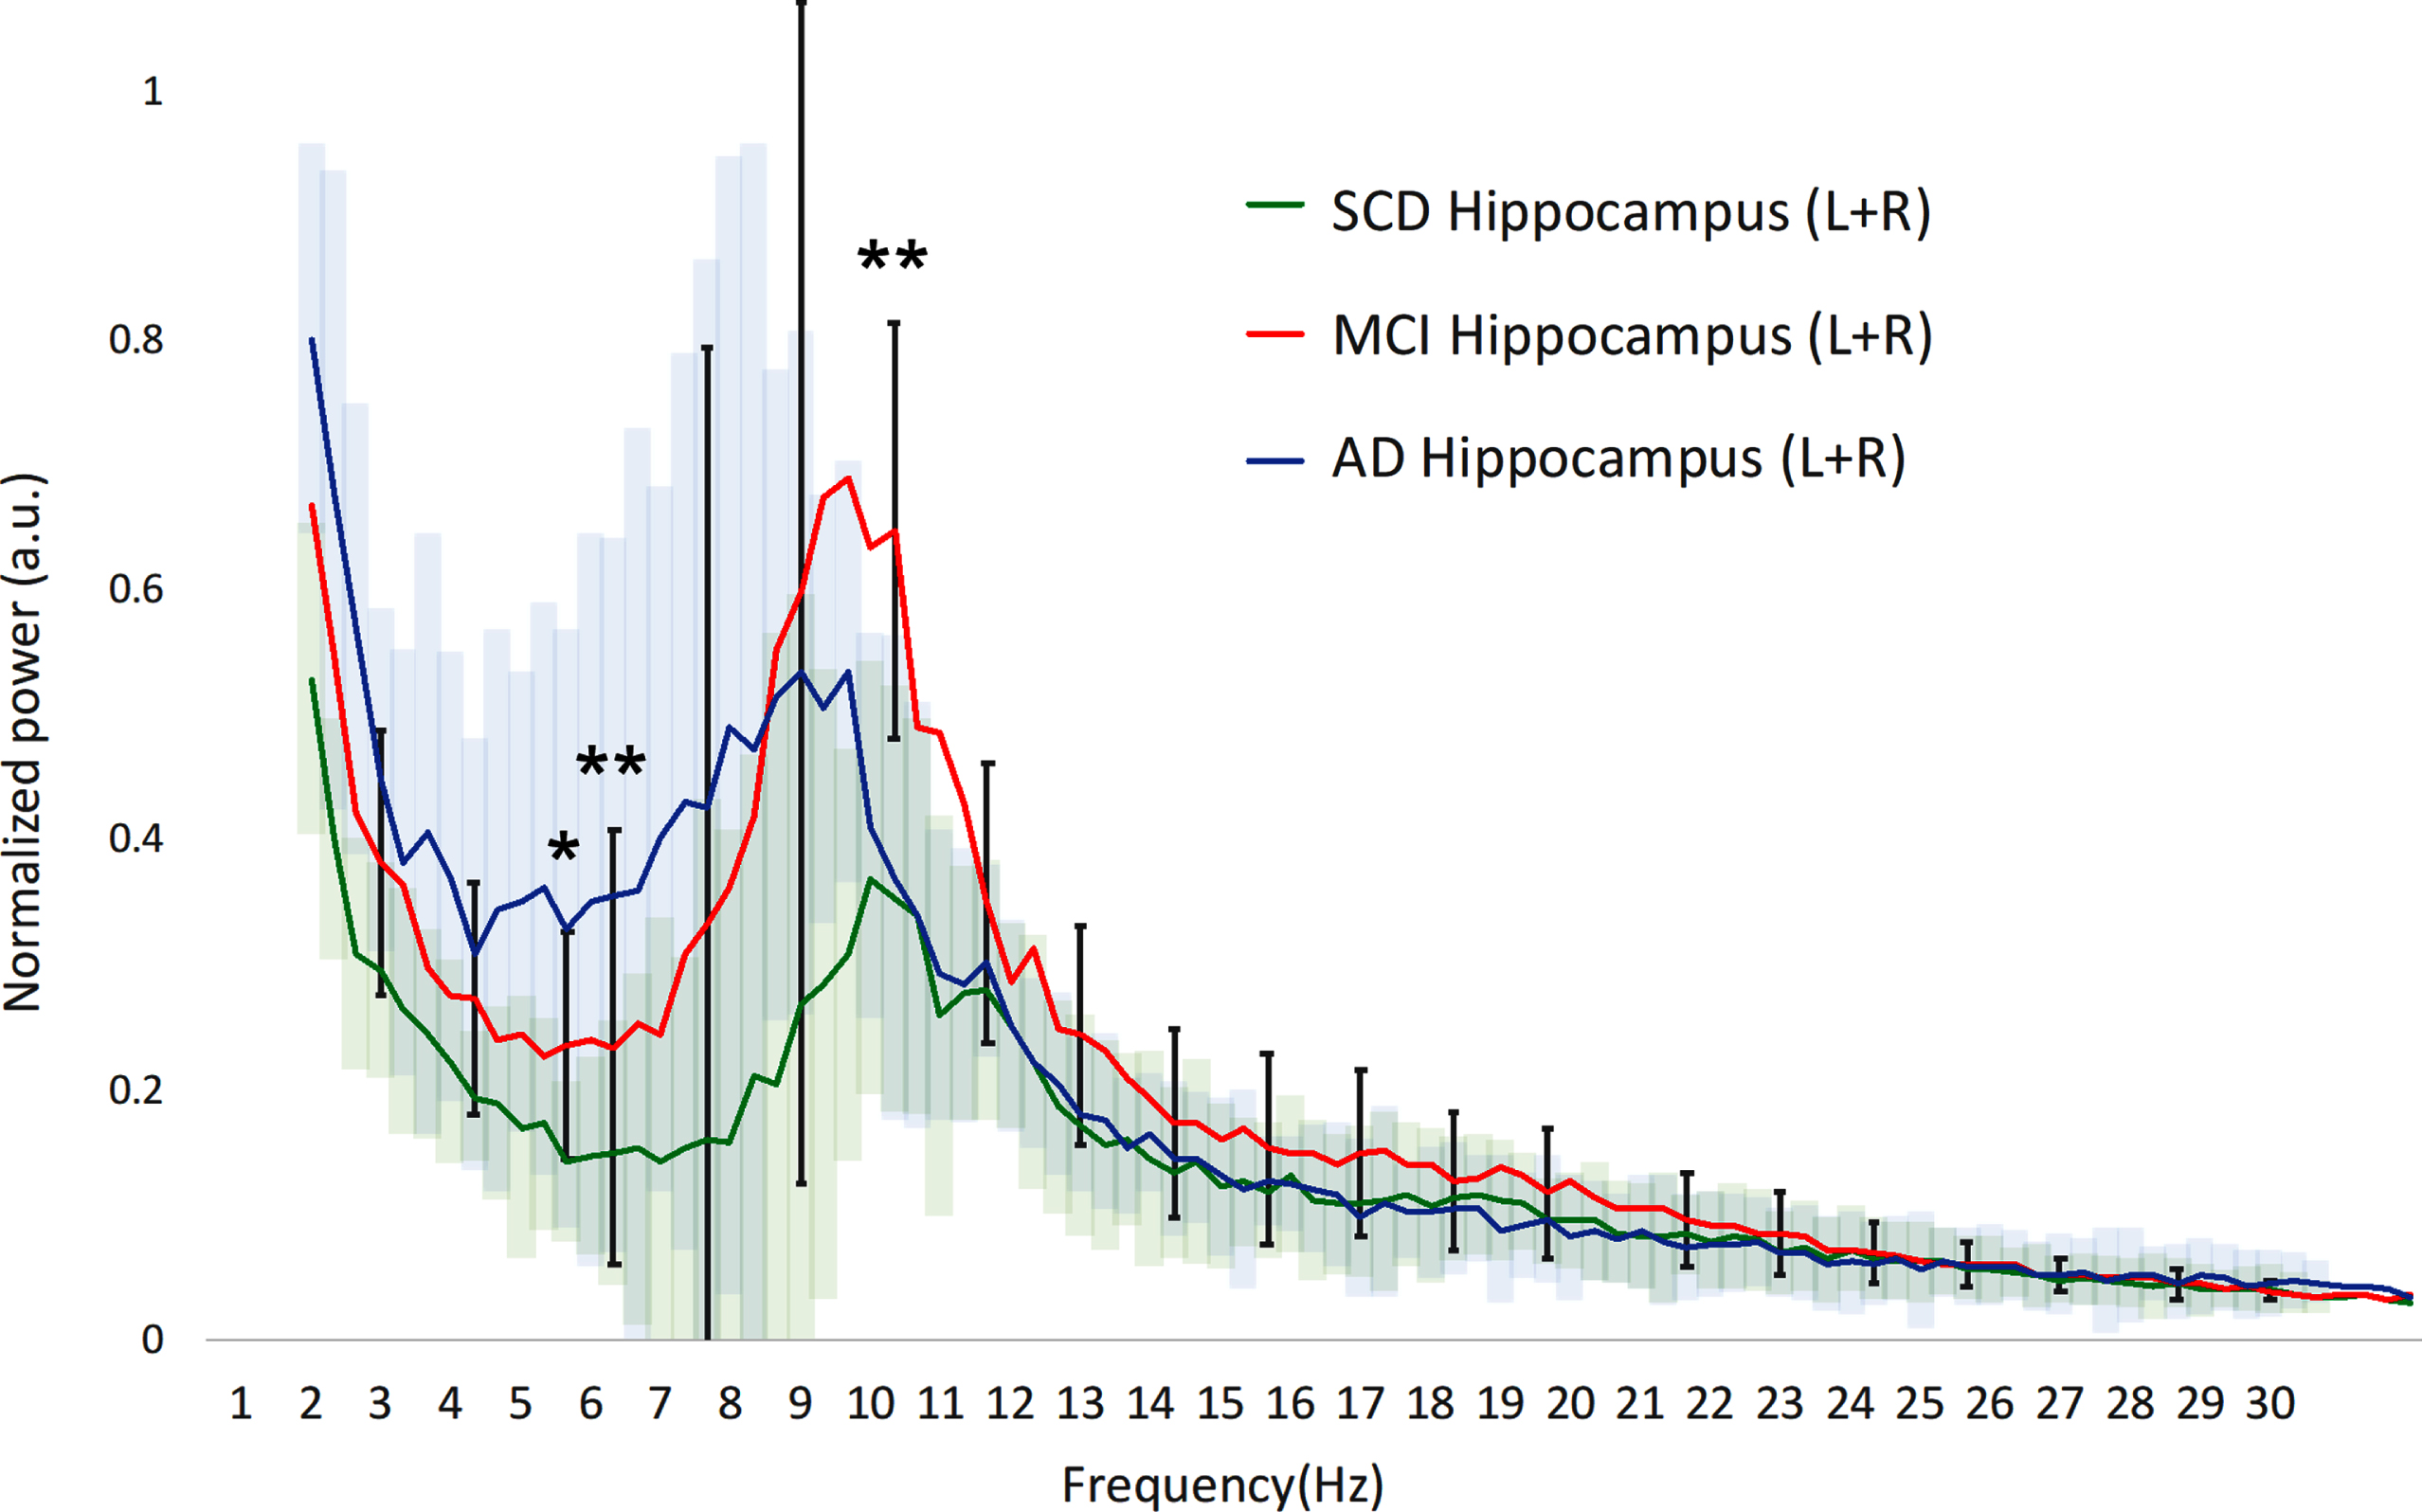 Hippocampal power spectra. SCD, subjective cognitive decline; MCI, mild cognitive impairment; AD, Alzheimer’s disease; Hz, Hertz; a.u., arbitrary units. The 95% confidence interval of the MCI group is drawn using solid black lines, for the SCD and AD groups color clouds are used, for visual clarity. Gamma frequency range (30–45 Hz) not shown. a.u., arbitrary units. *indicates significance level p < 0.05 (MCI versus SCD). **indicates significance level p < 0.01 (MCI versus SCD).